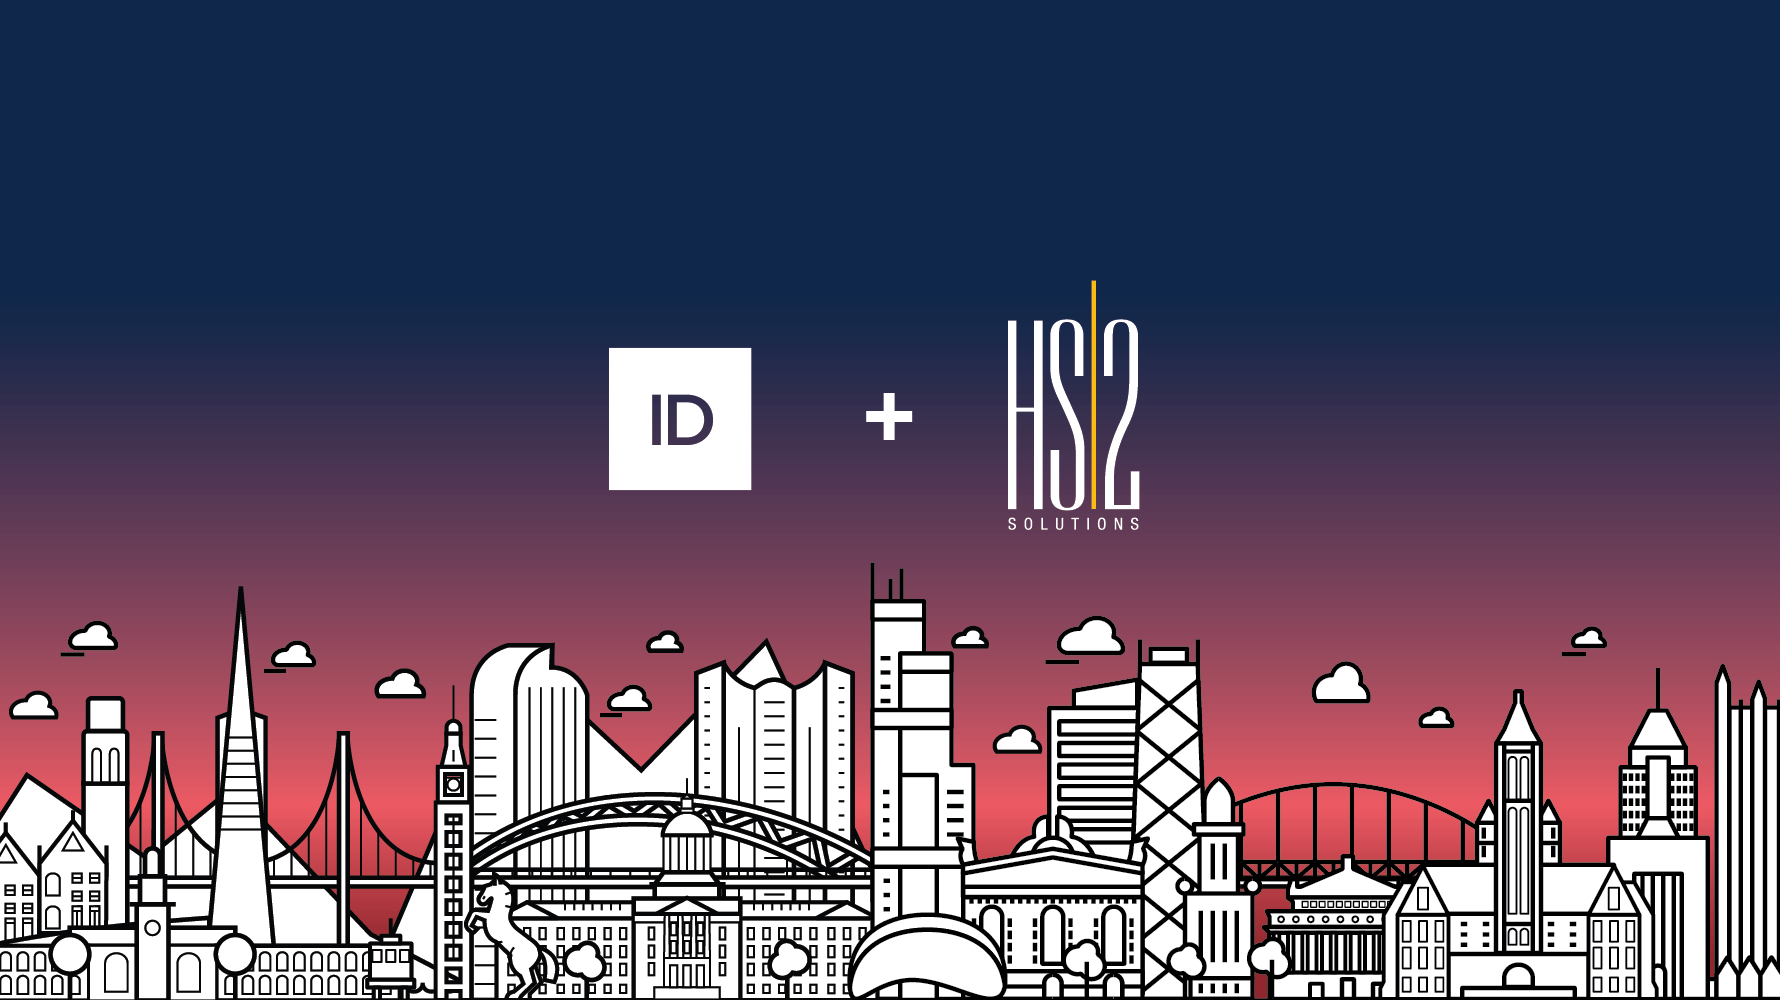 HS2 Solutions & LunaMetrics Grow With Infield Digital Acquisition